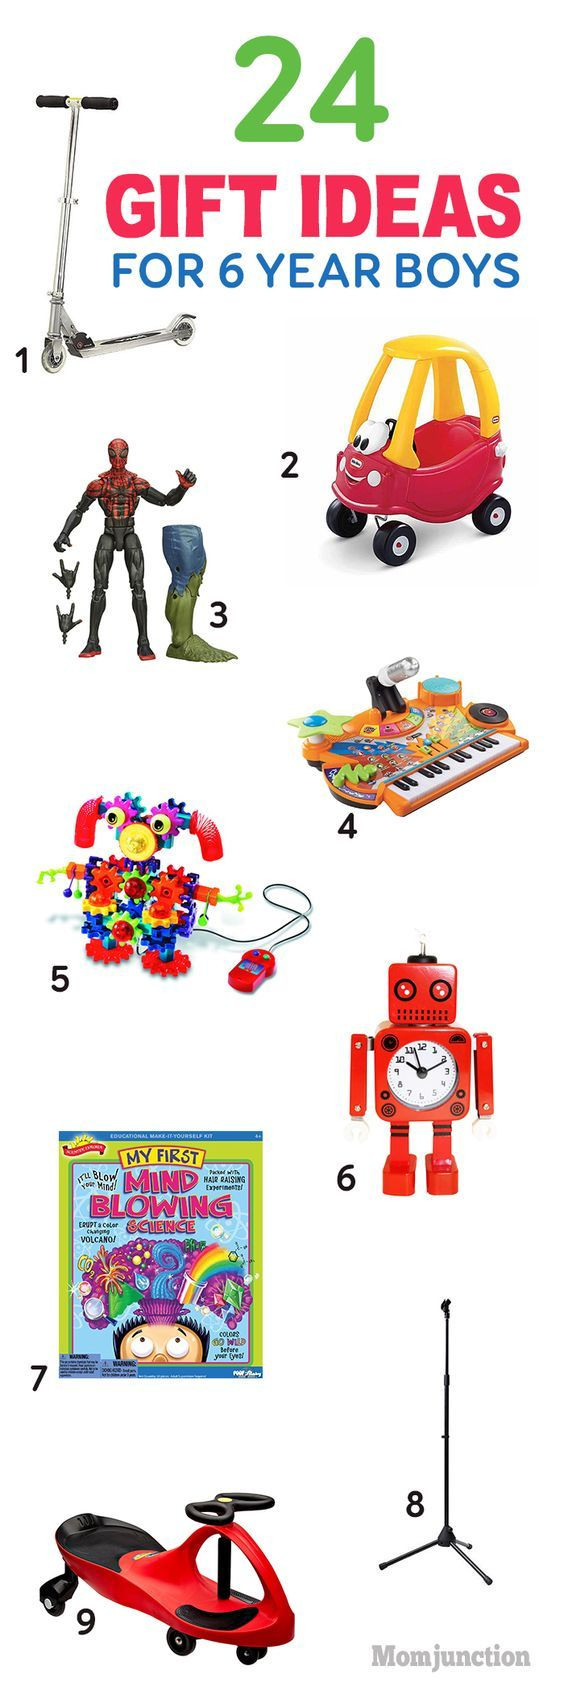 Christmas Gift Ideas 7 Year Old Boy
 21 best Gift Ideas Boys 3 to 7 images on Pinterest